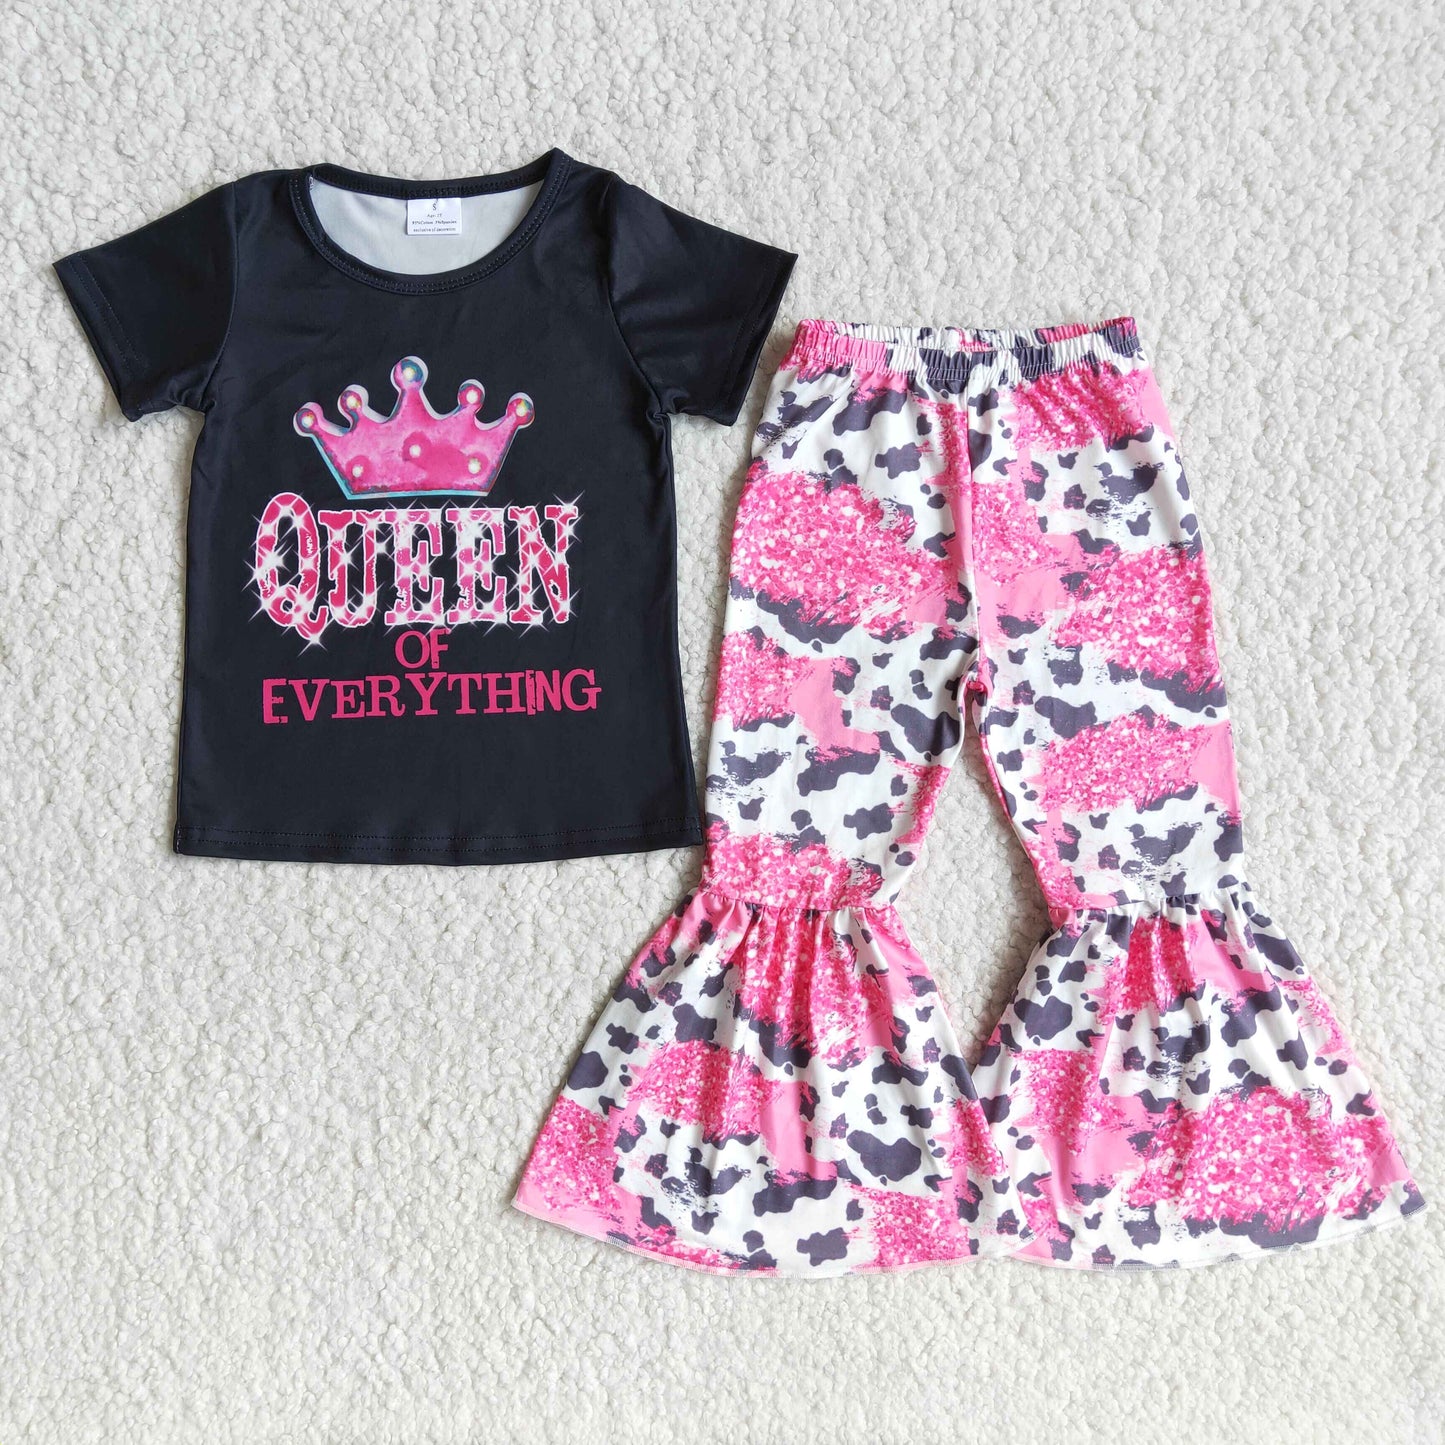 Queen of everything girls bell bottom sets